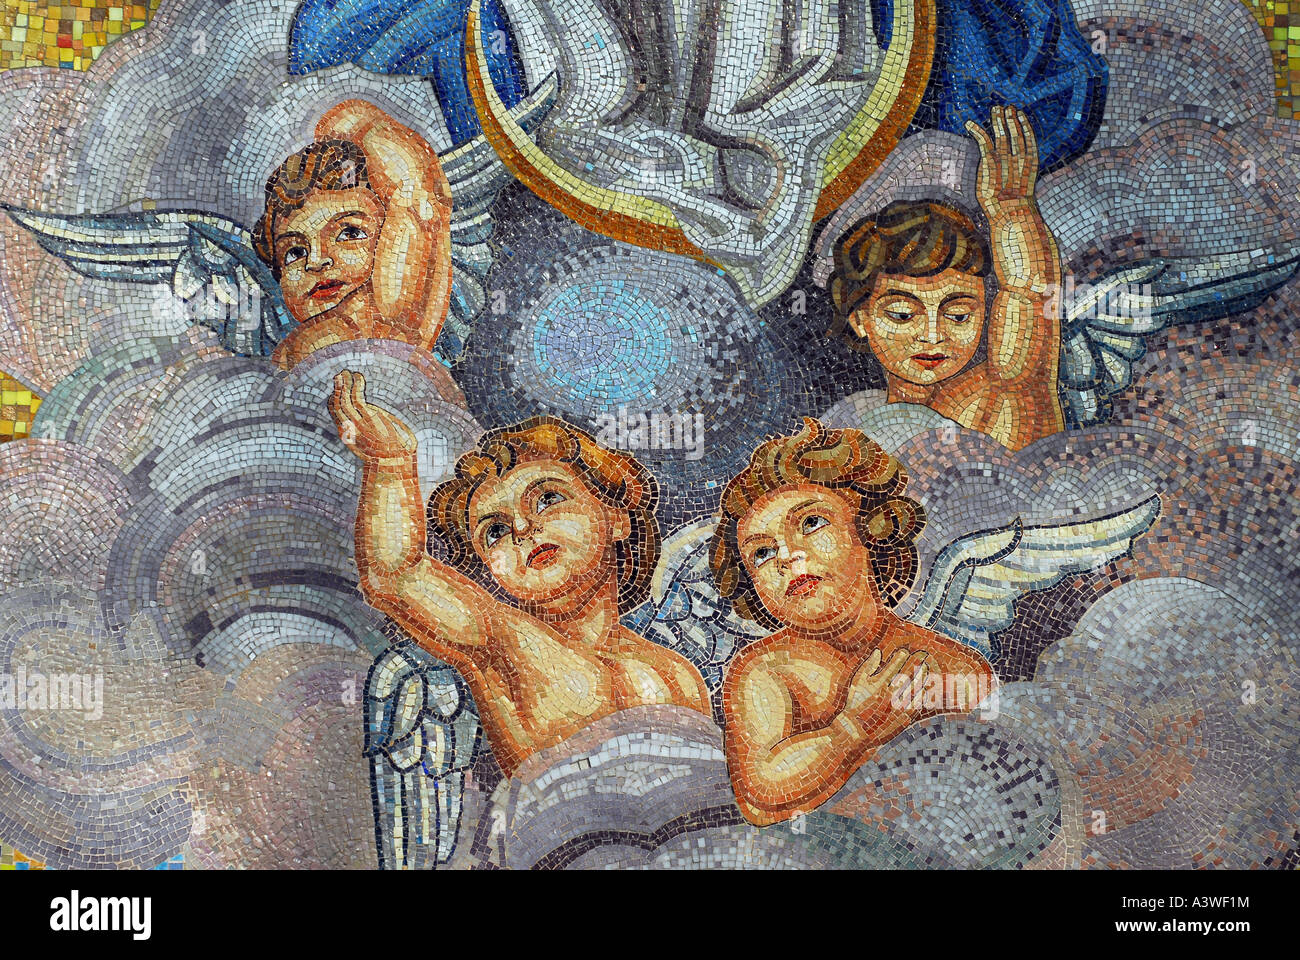 Angels made of mosaic tiles Stock Photo